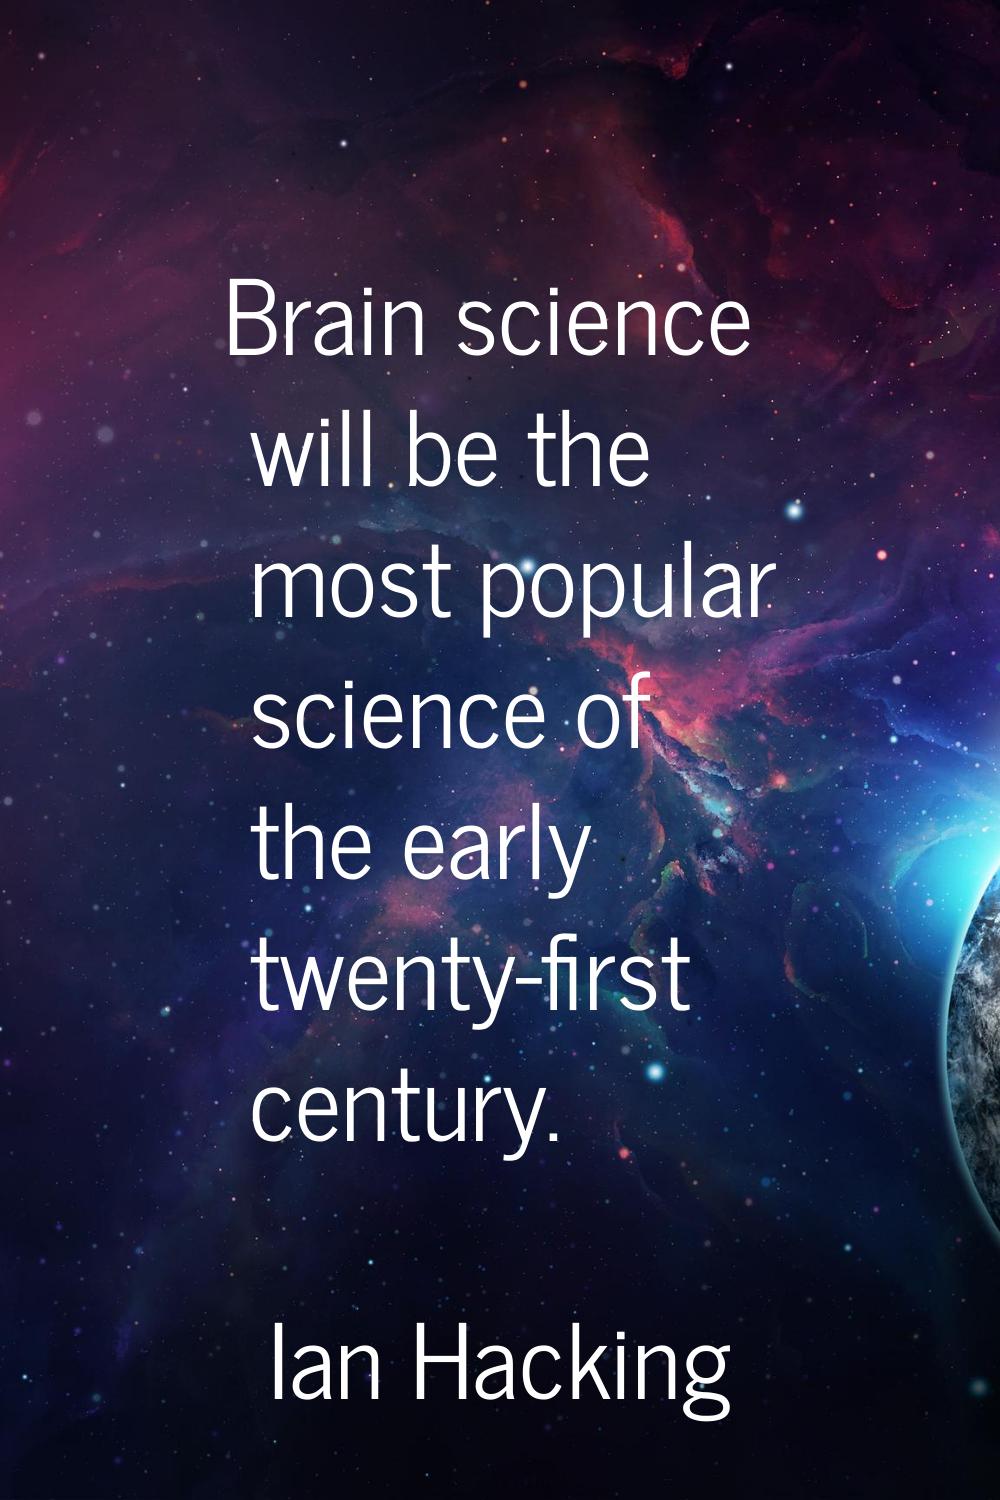 Brain science will be the most popular science of the early twenty-first century.